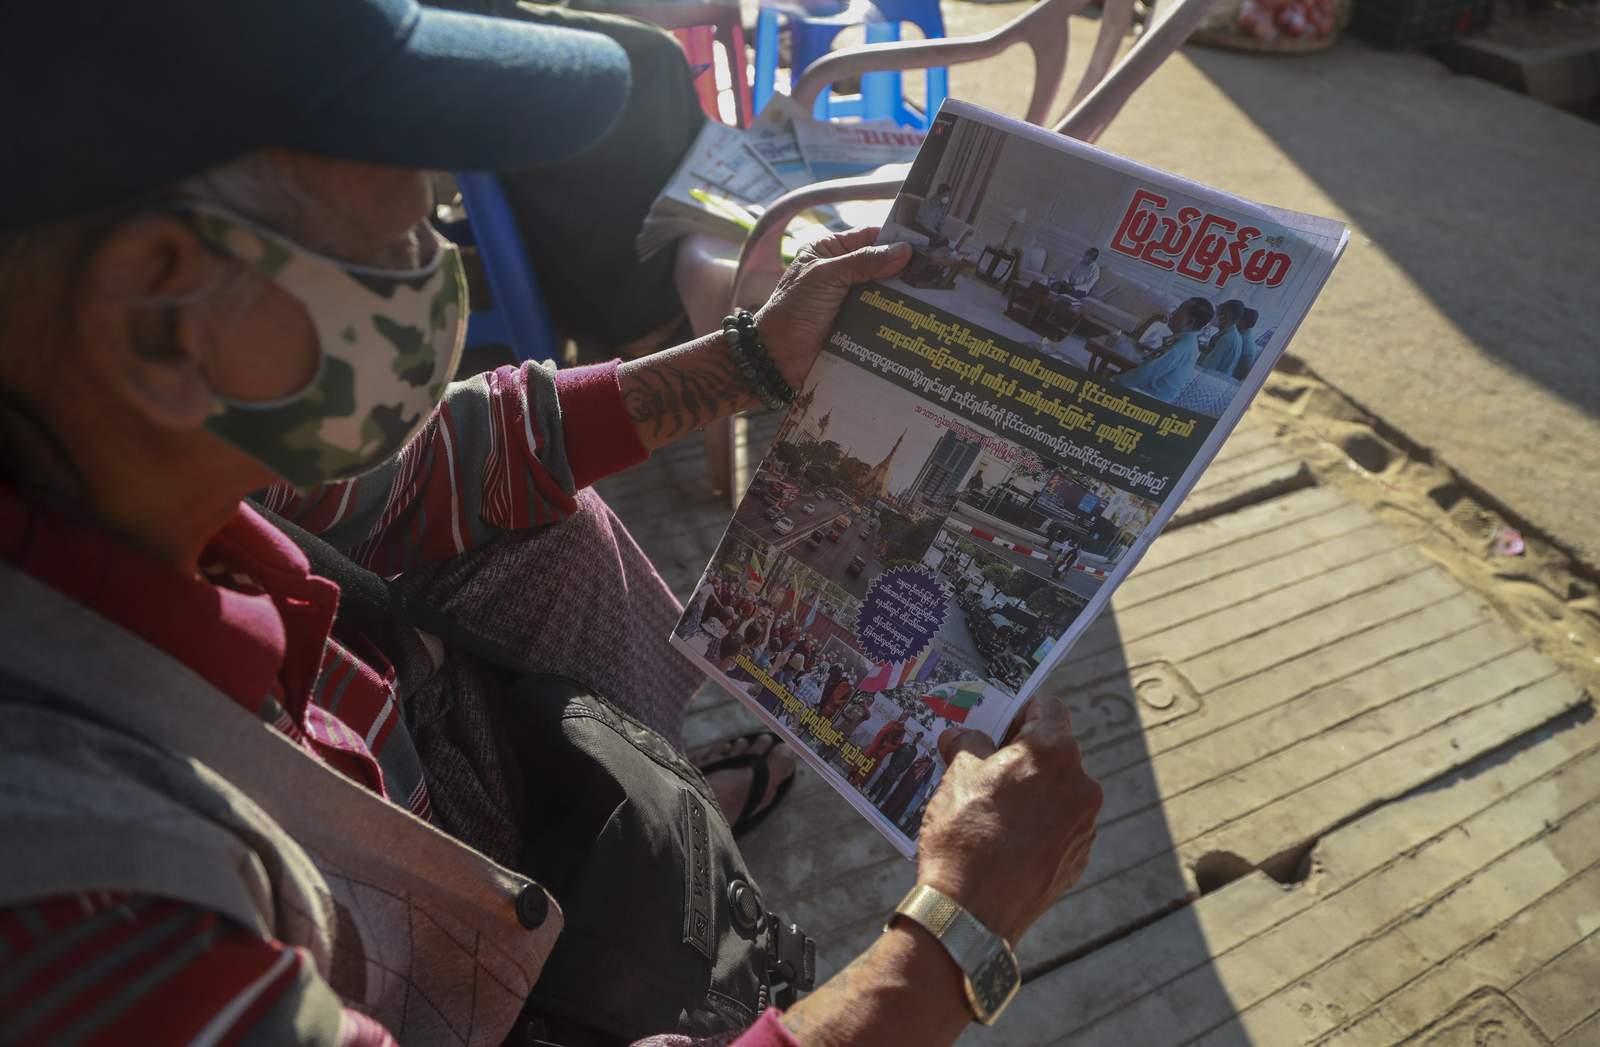 EXPLAINER: How Myanmar is cracking down on journalists